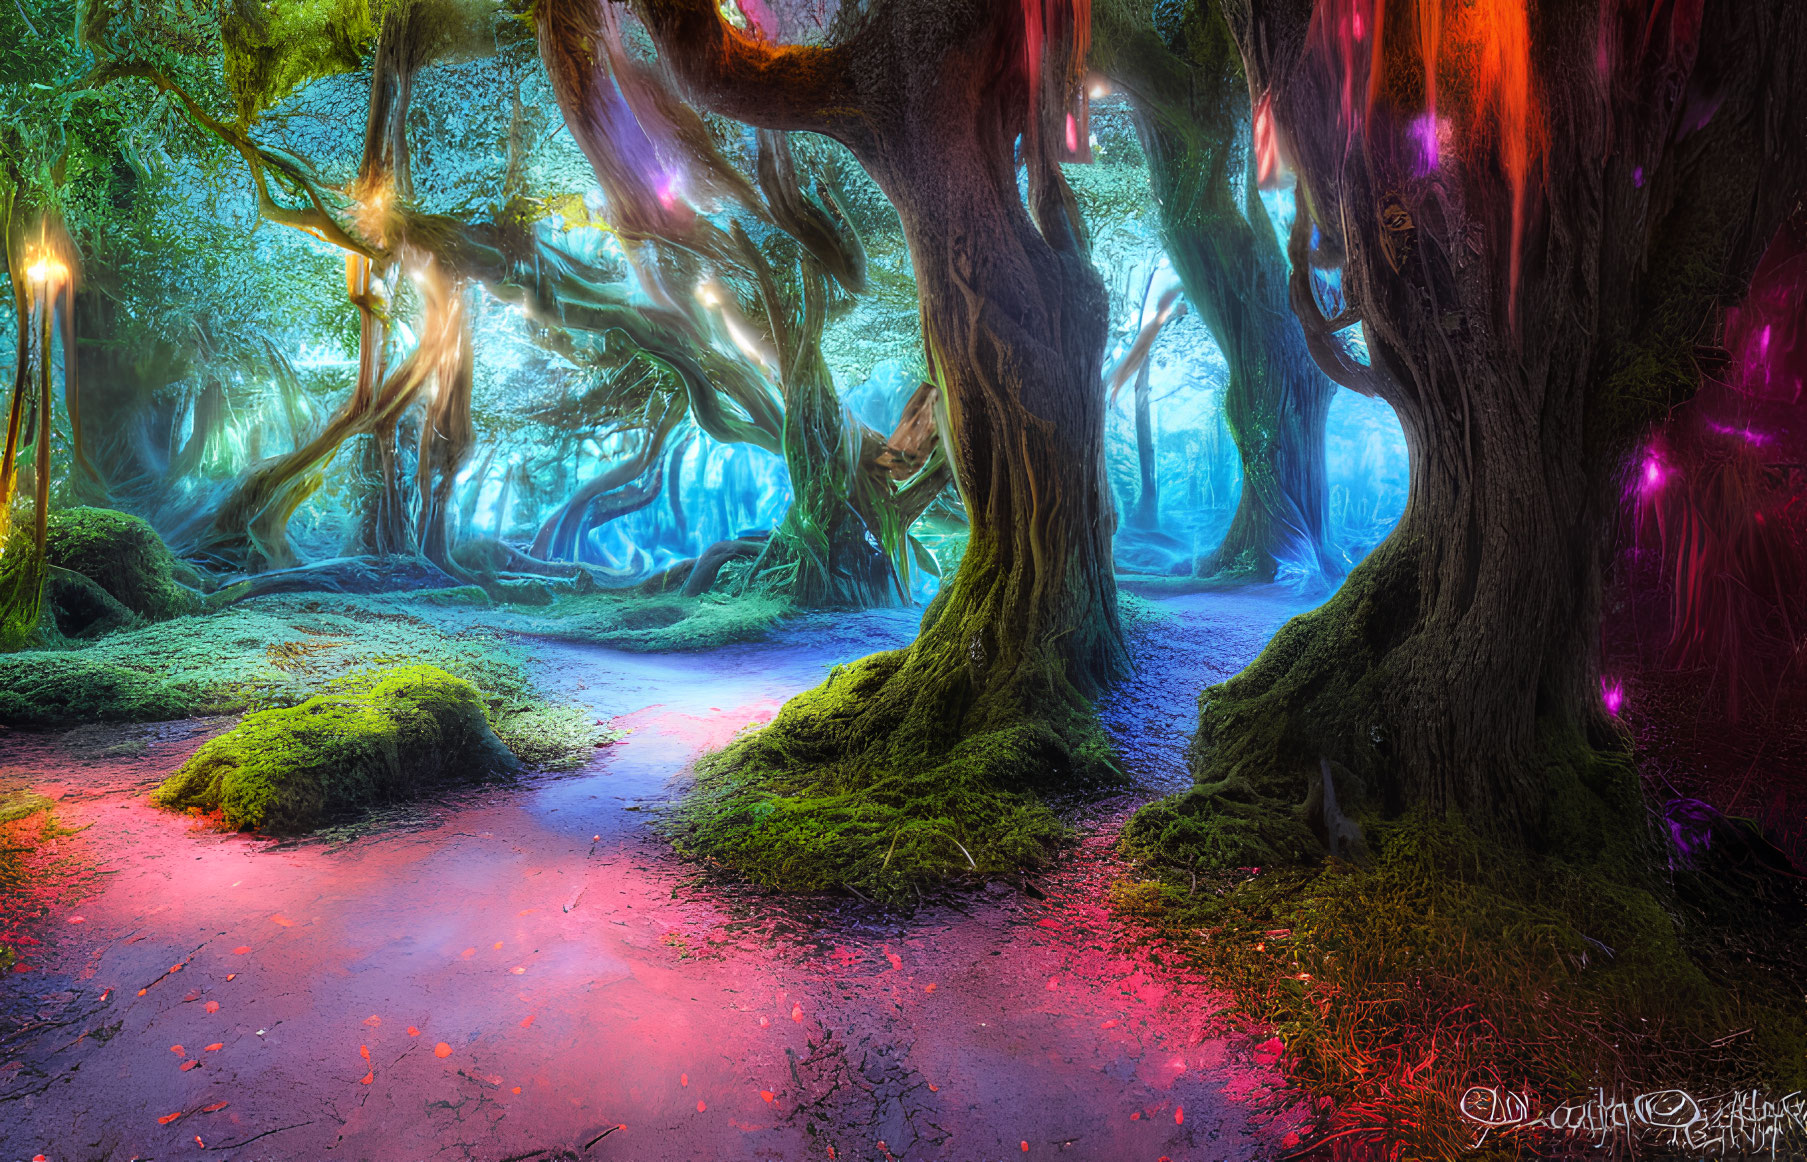 Mystical Enchanted Forest with Twisted Trees and Glowing Lanterns